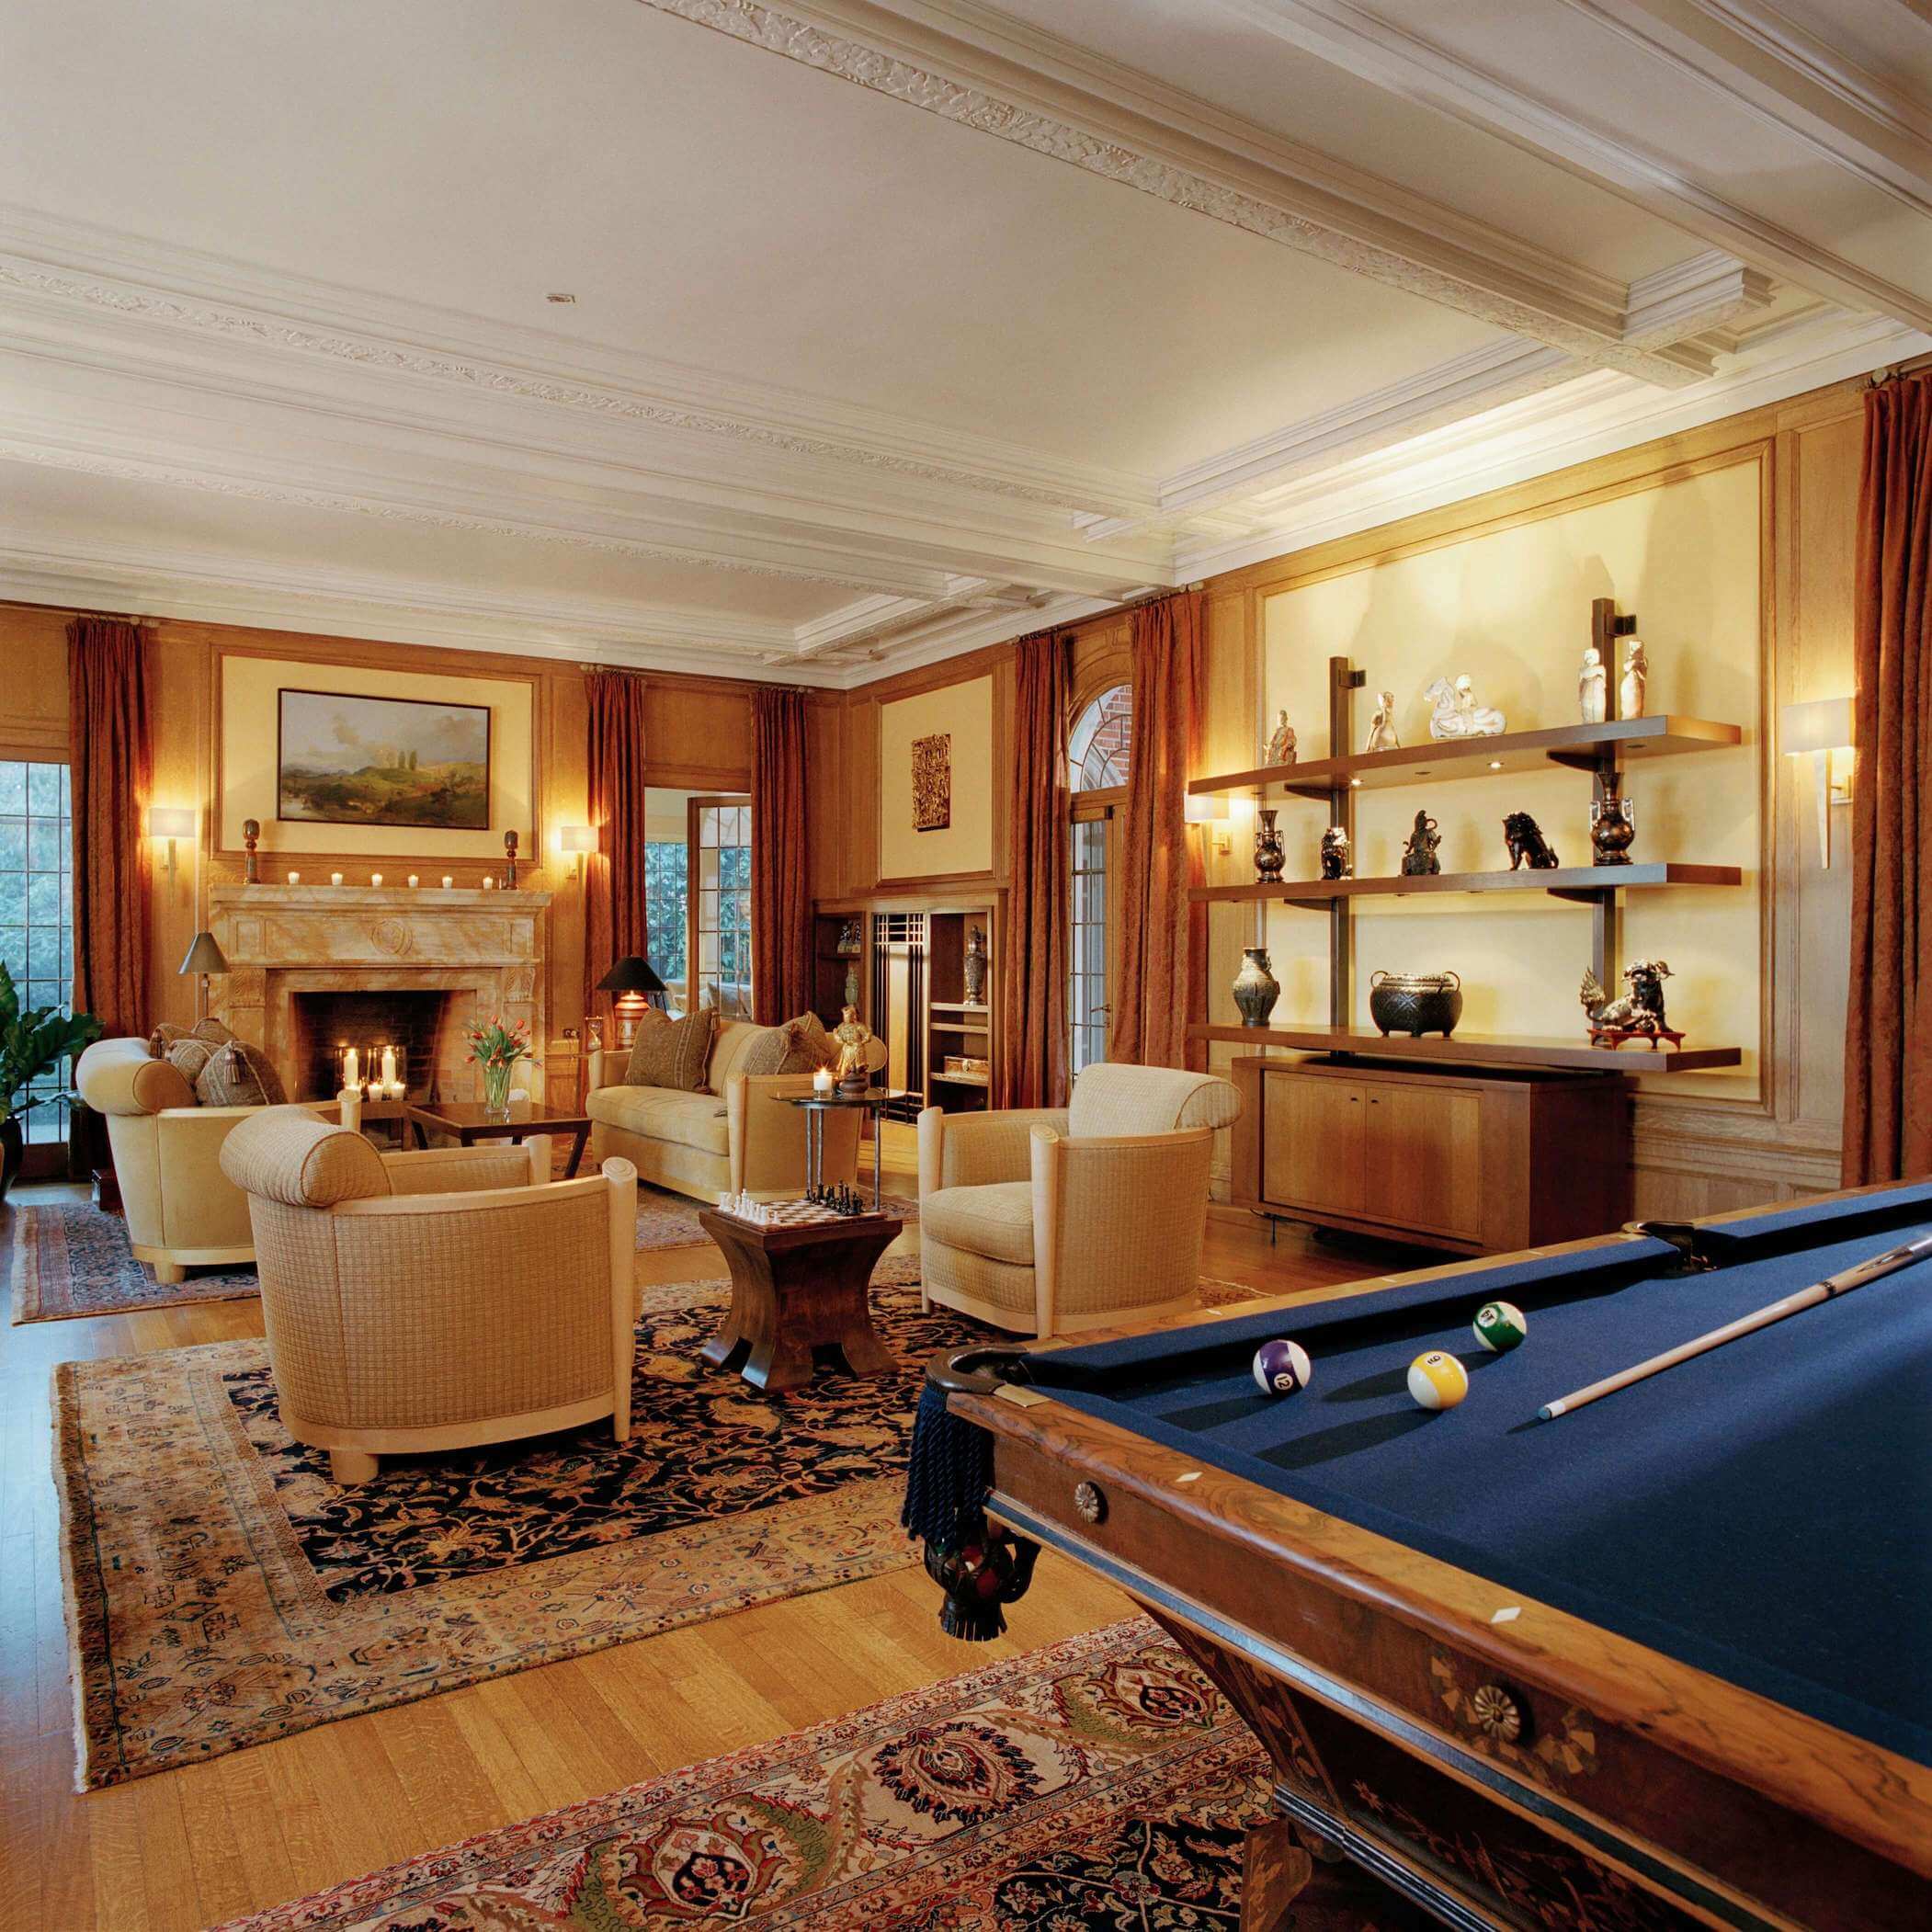 Cobb Estate Interior lounge with pool table